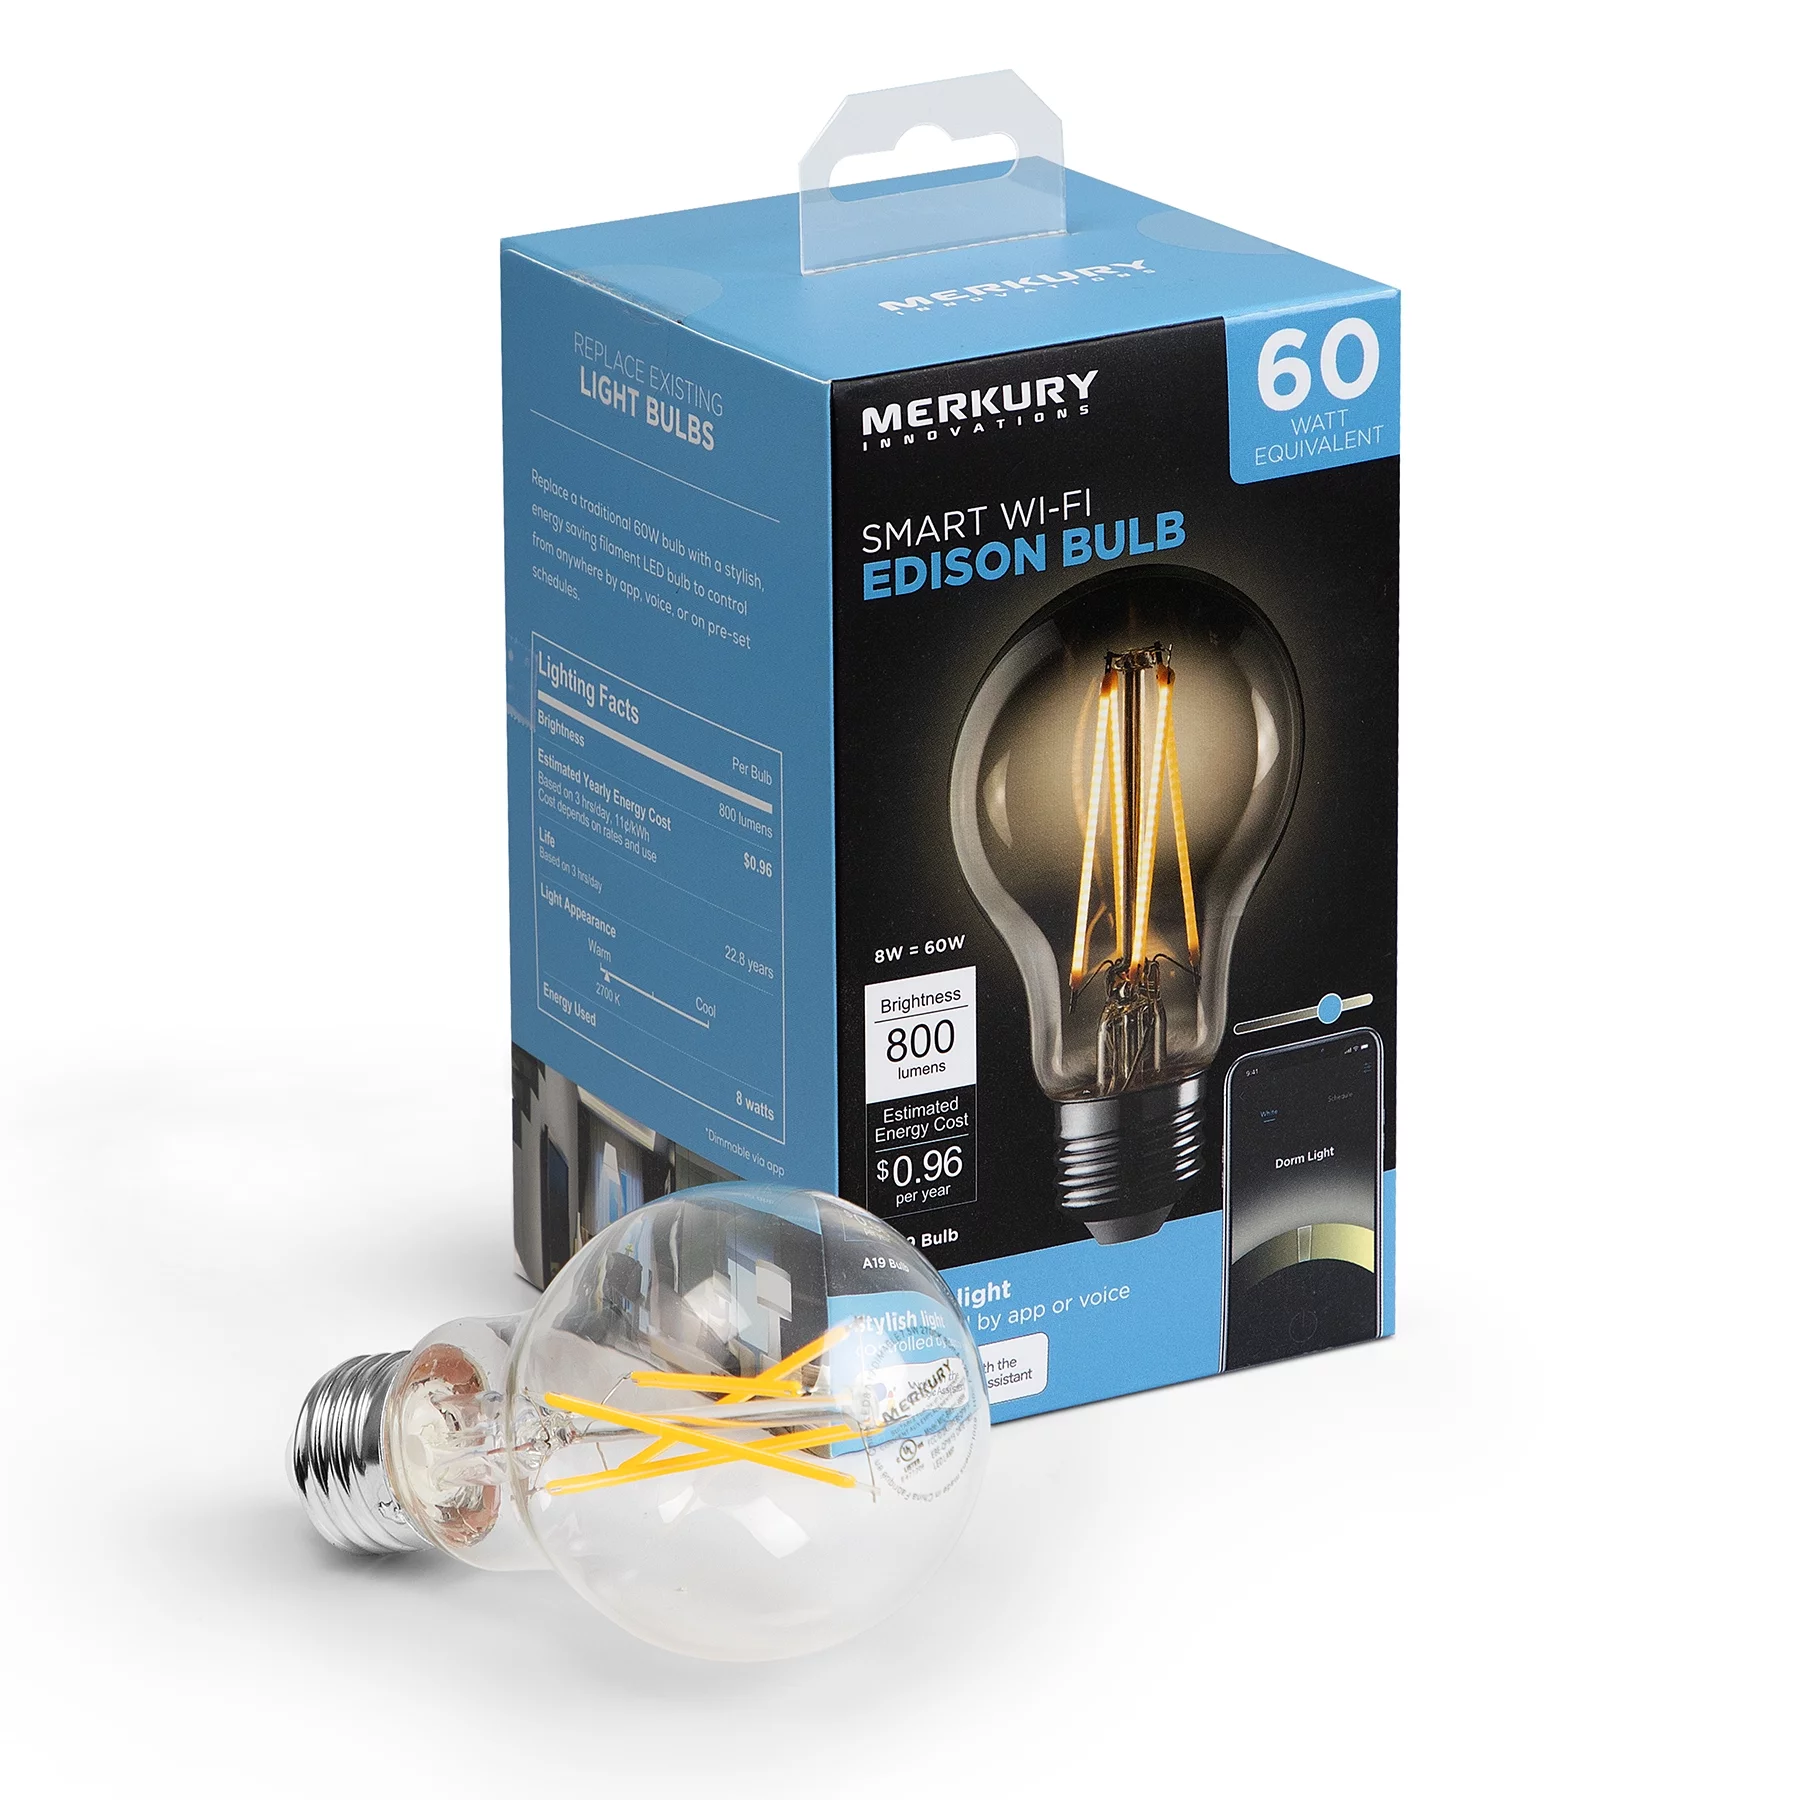 Merkury Innovations A19 WiFi LED Smart Bulb 60W Glass Vintage Edison Style, Requires 2.4GHz WiFi